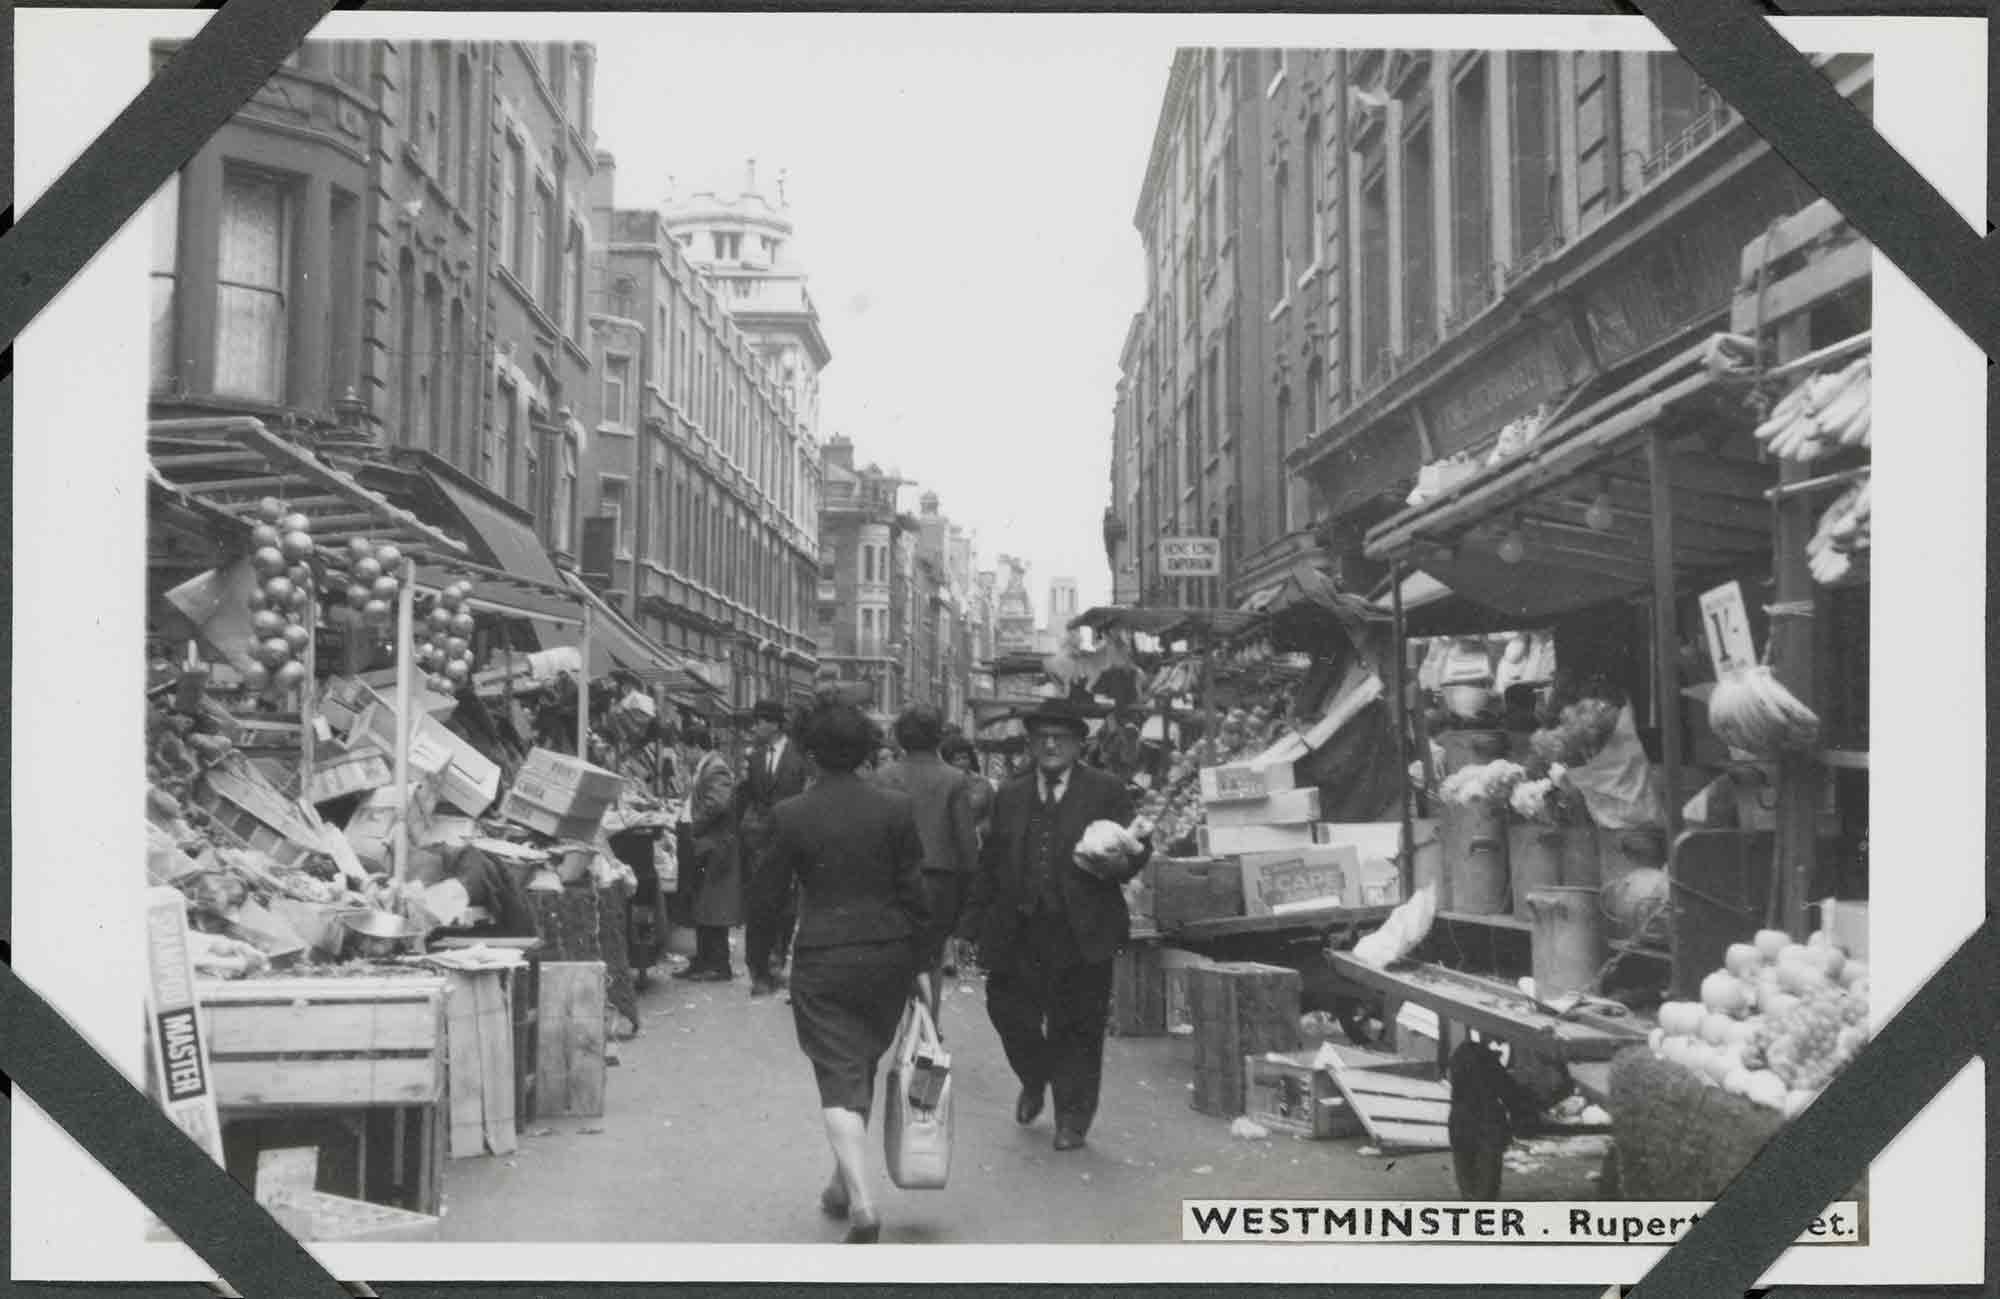 Black and white photograph of an urban street scene featuring people walking on a road flanked by market stalls set out in front of rows of stone-fronted buildings of multiple storeys. The market stalls include displays of fruit, vegetables, and flowers. Several wooden boxes are discarded around them. In the foreground, a man in a dark three-piece suit and hat walks toward the camera carrying a bag, a woman in a dark two-piece suit and carrying a light shopping bag walks away from the camera. Four corner photograph album mounts are visible. 